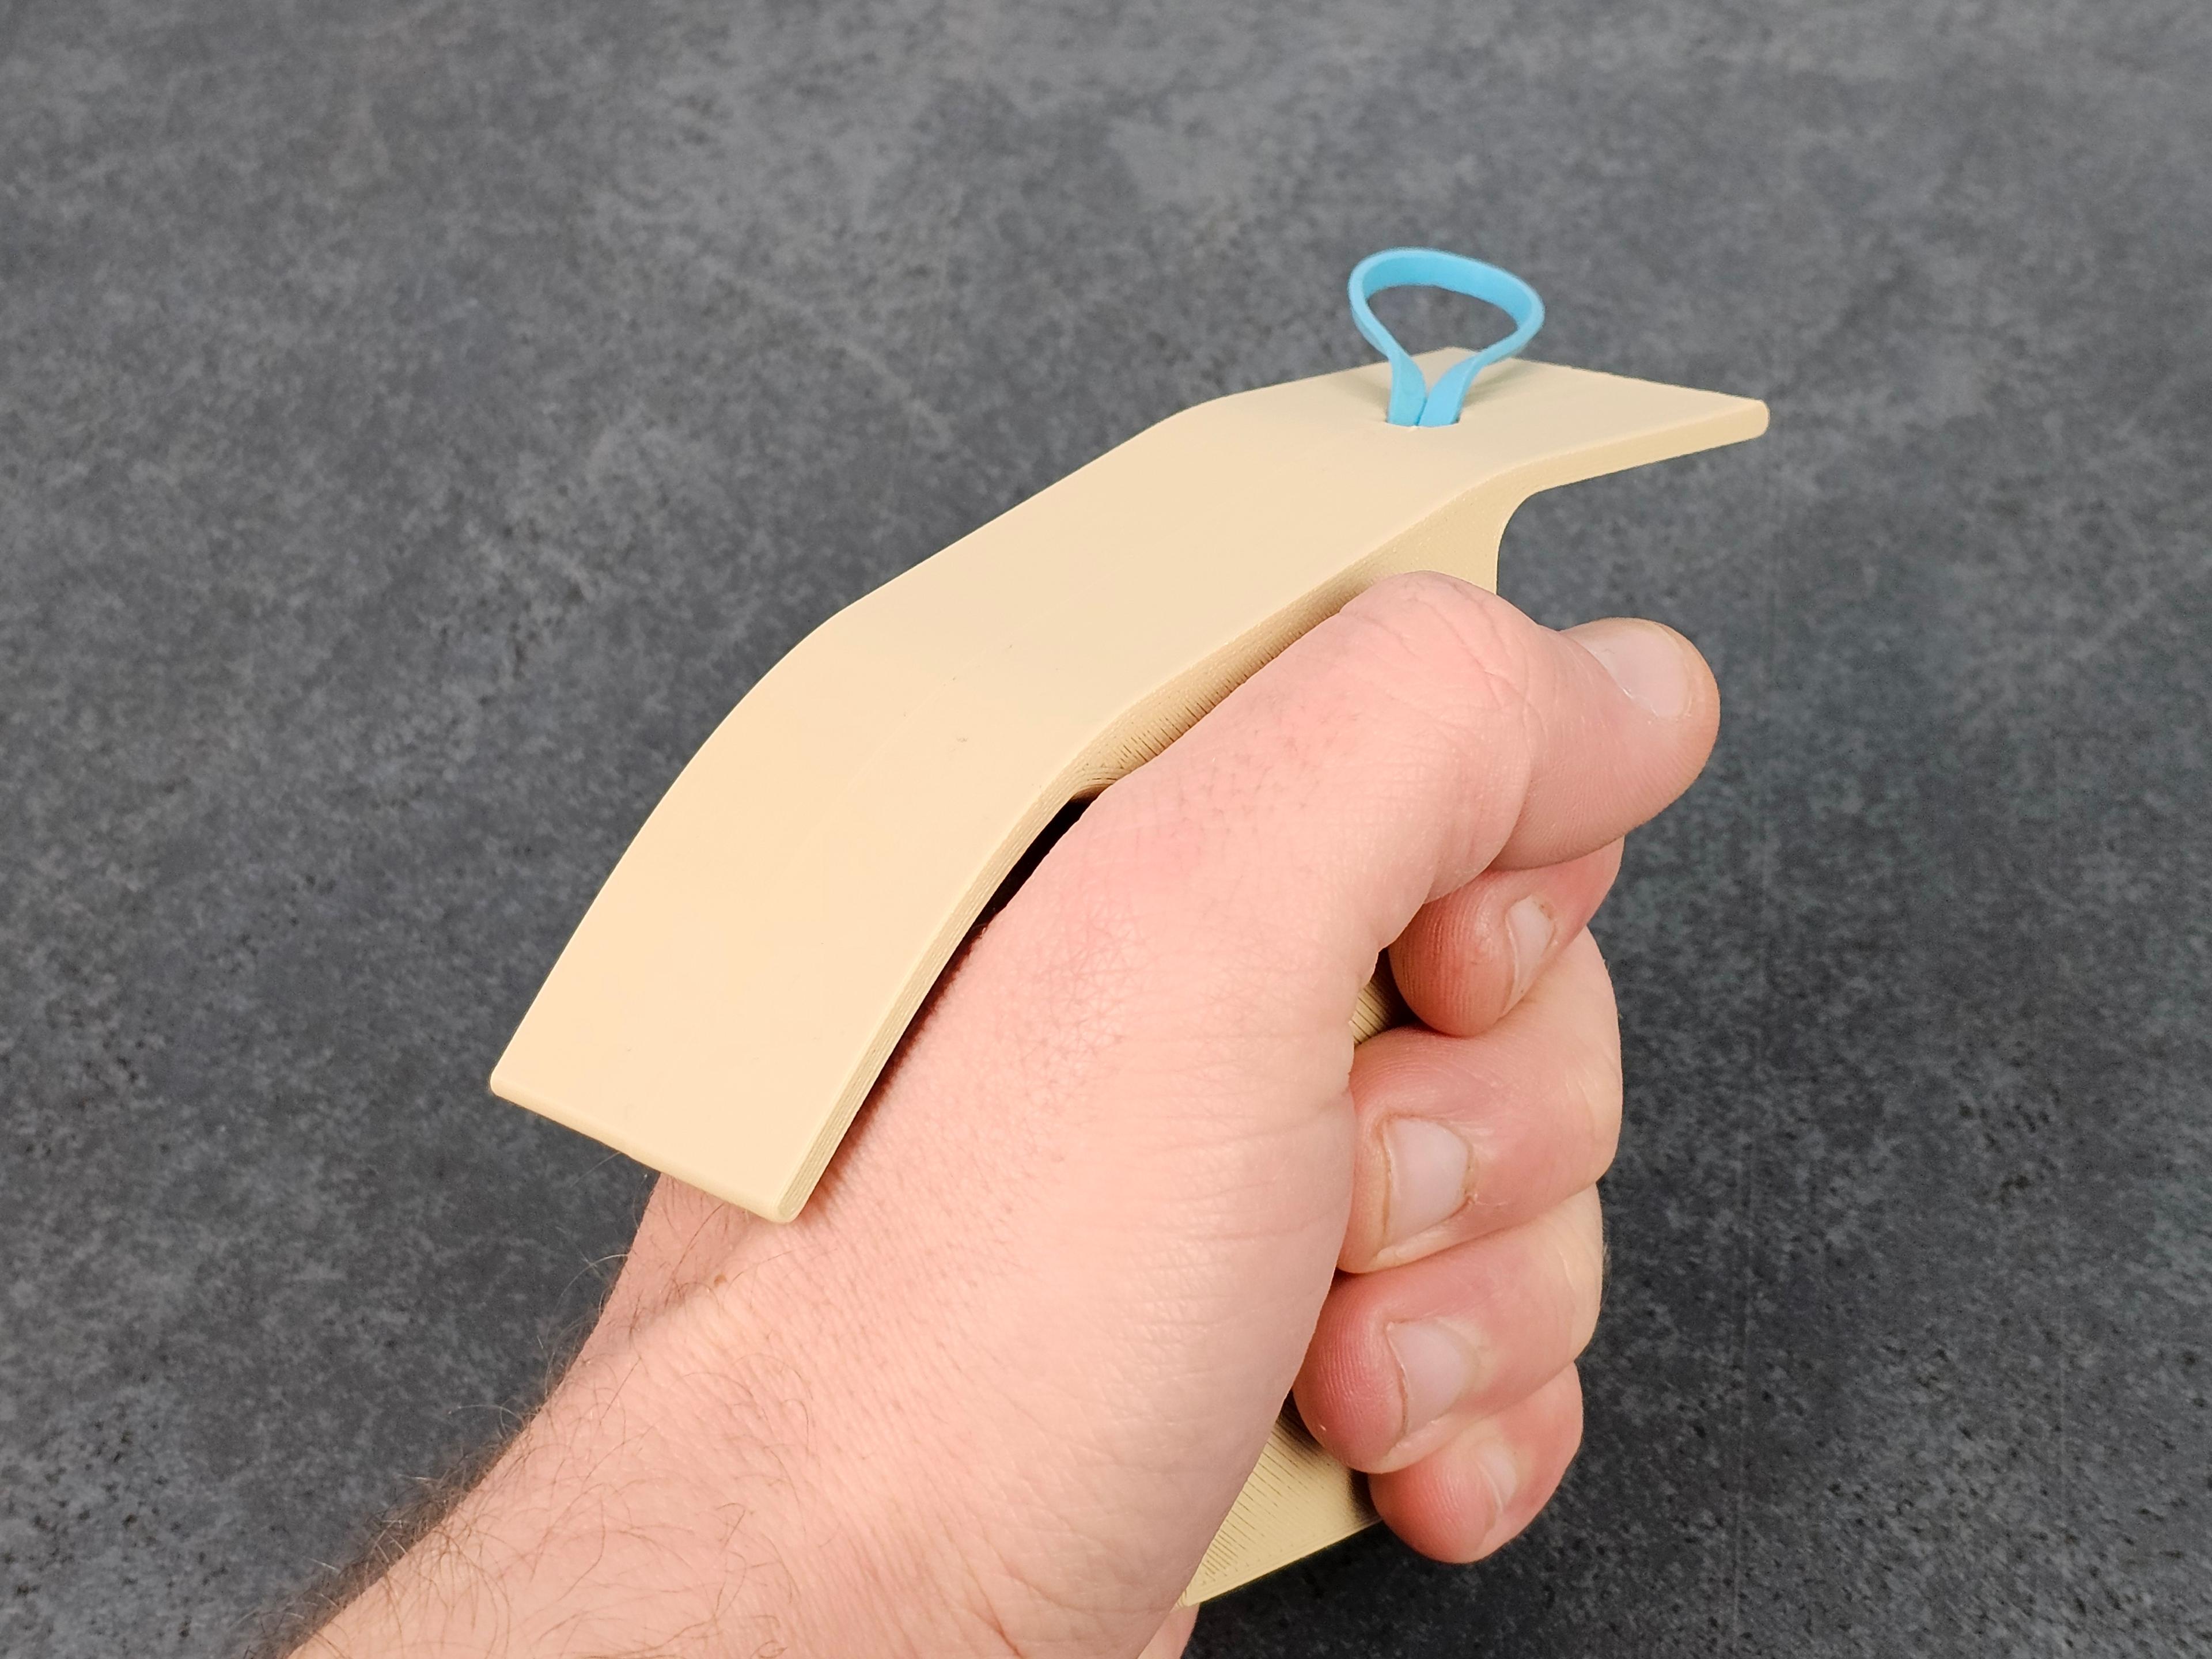 Rubberband Airplane Launcher - Protective Gear 3d model